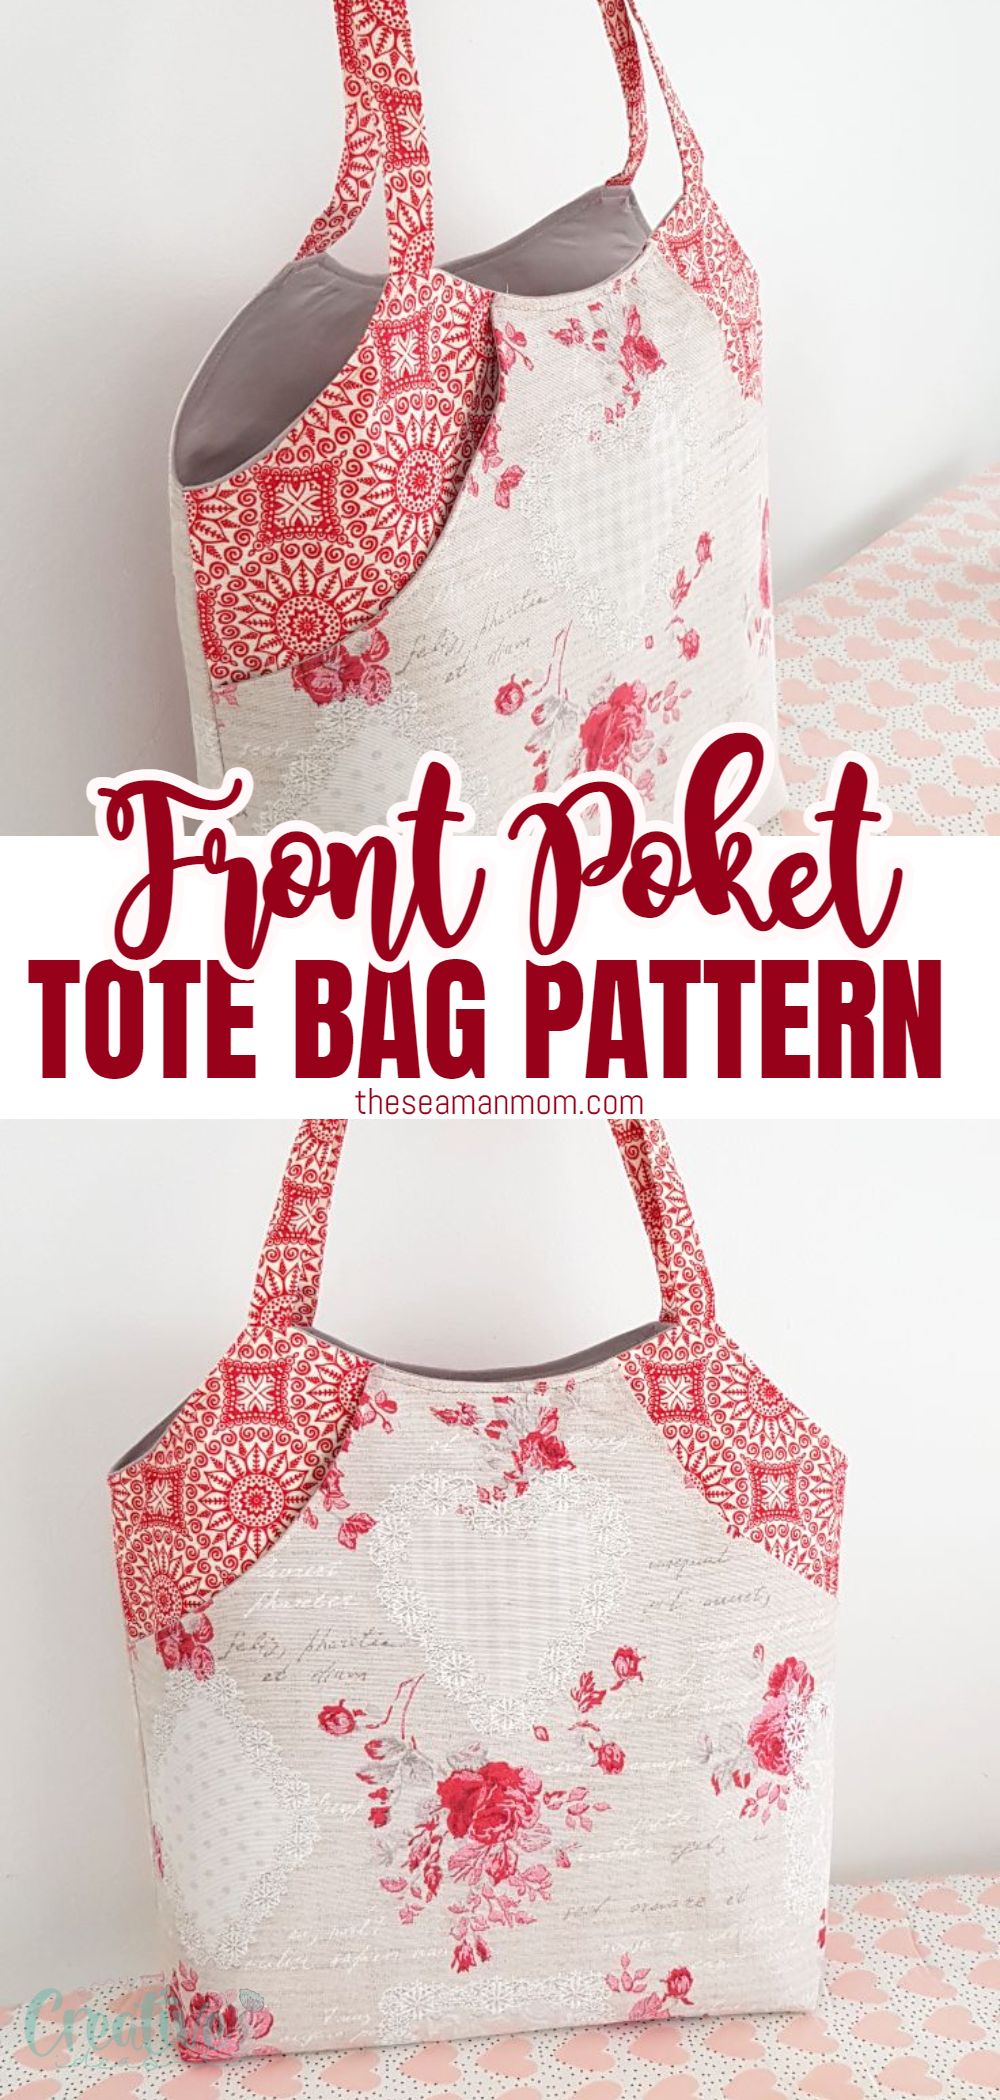 This simple but stunning pocket tote bag pattern featuring a deep front pocket is the perfect roomy pocket tote bag to sew to carry just about anything you need! Create a one-of-a-kind large tote bag pattern by choosing colorful and coordinating fabrics for the bag, the pocket and the straps, for a chic yet low key custom look.  via @petroneagu